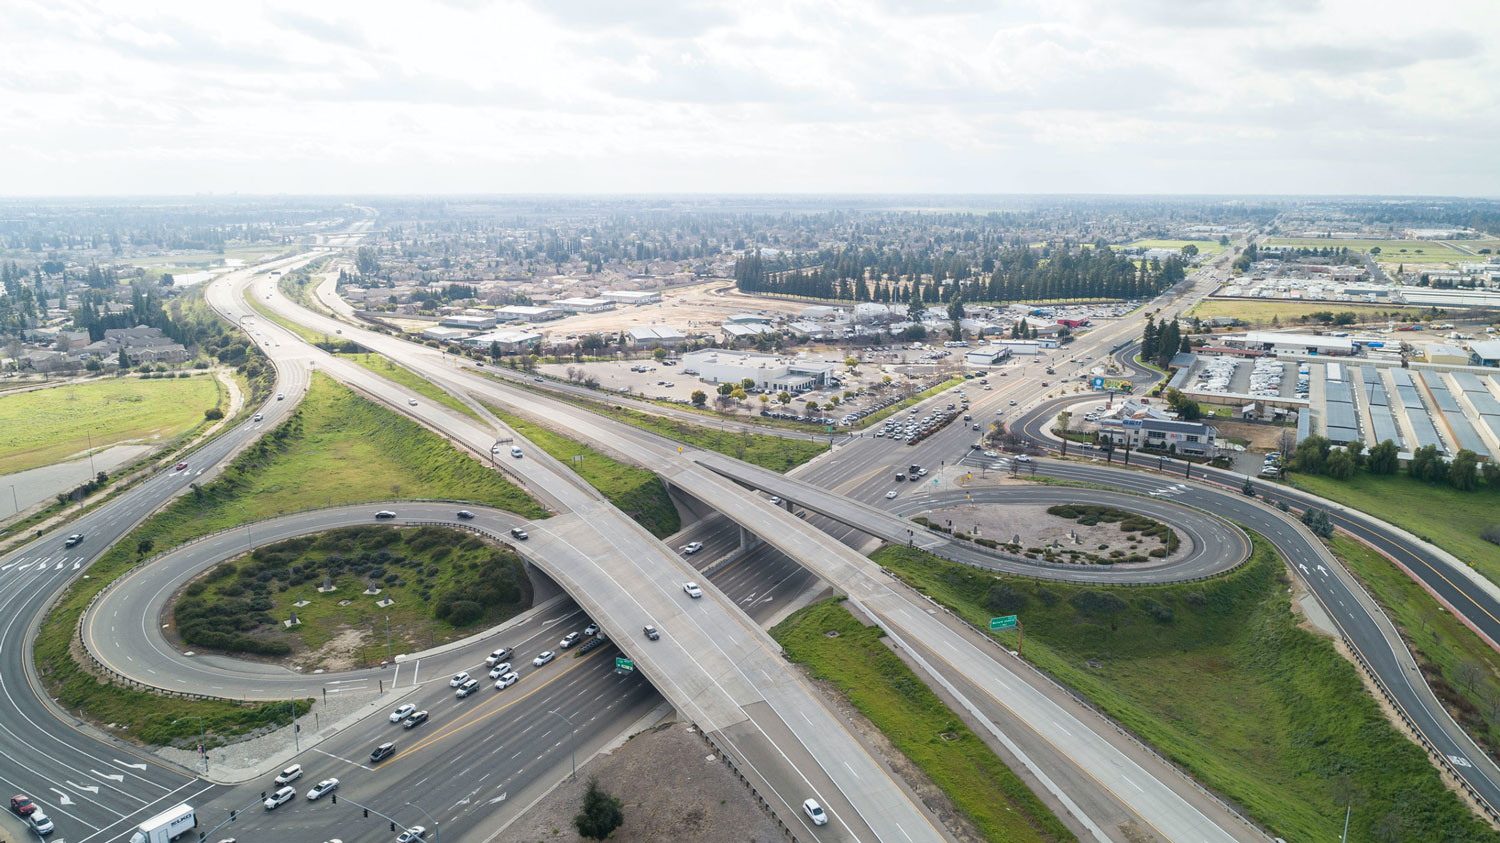 Measure C funds are used to upgrade and invest in infrastructure like this freeway exchange.